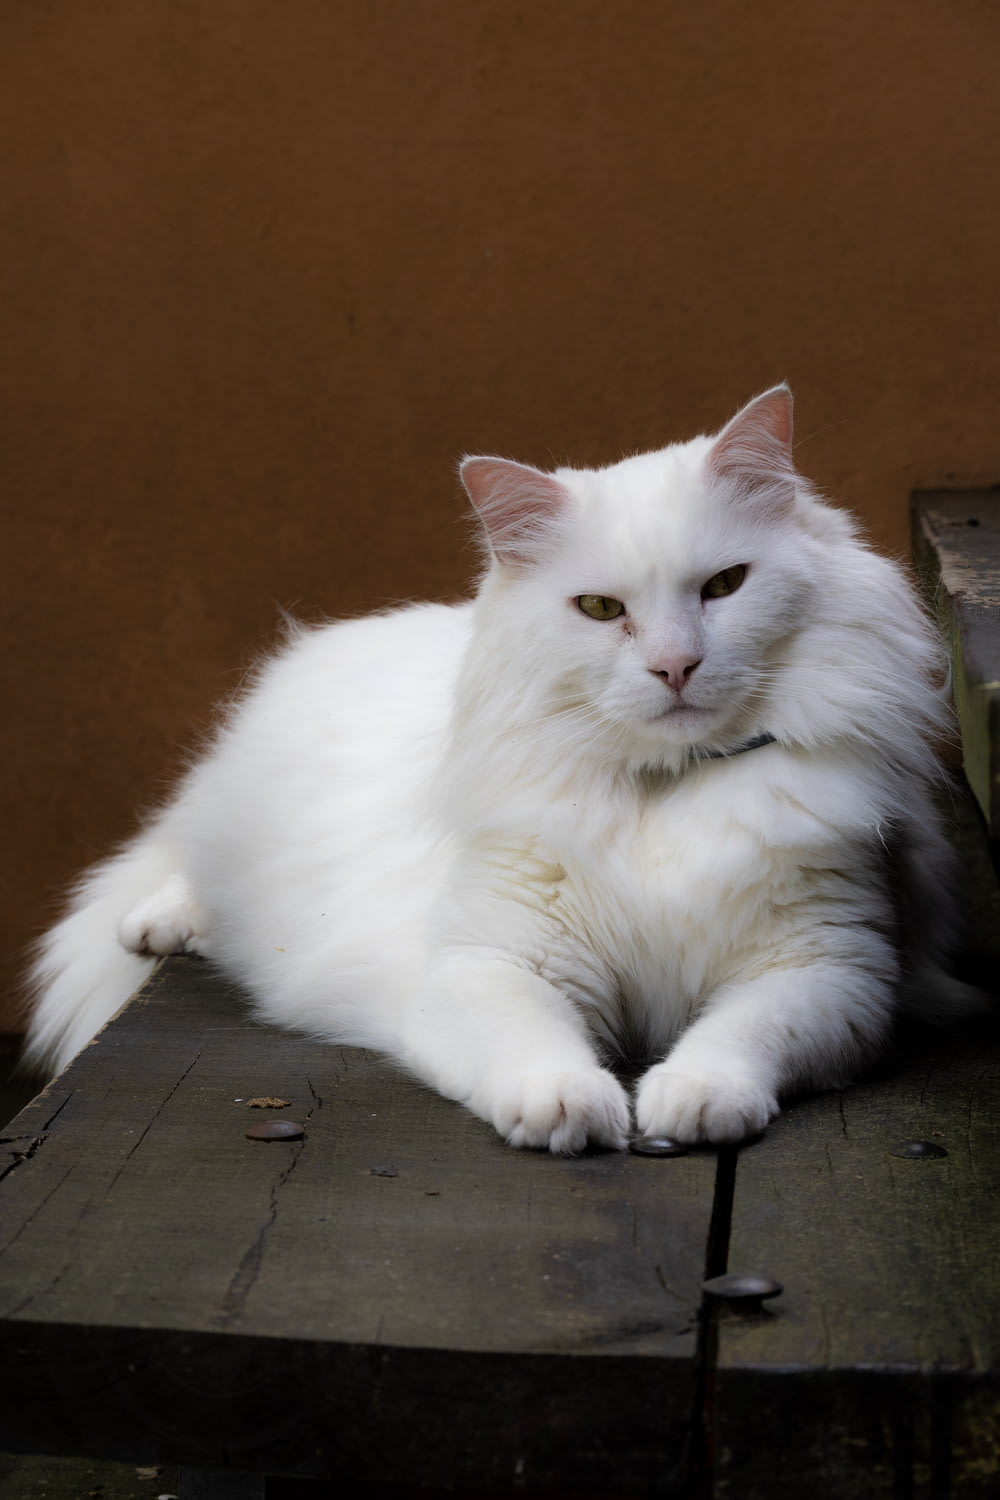 a white cat sitting on top of a wooden table